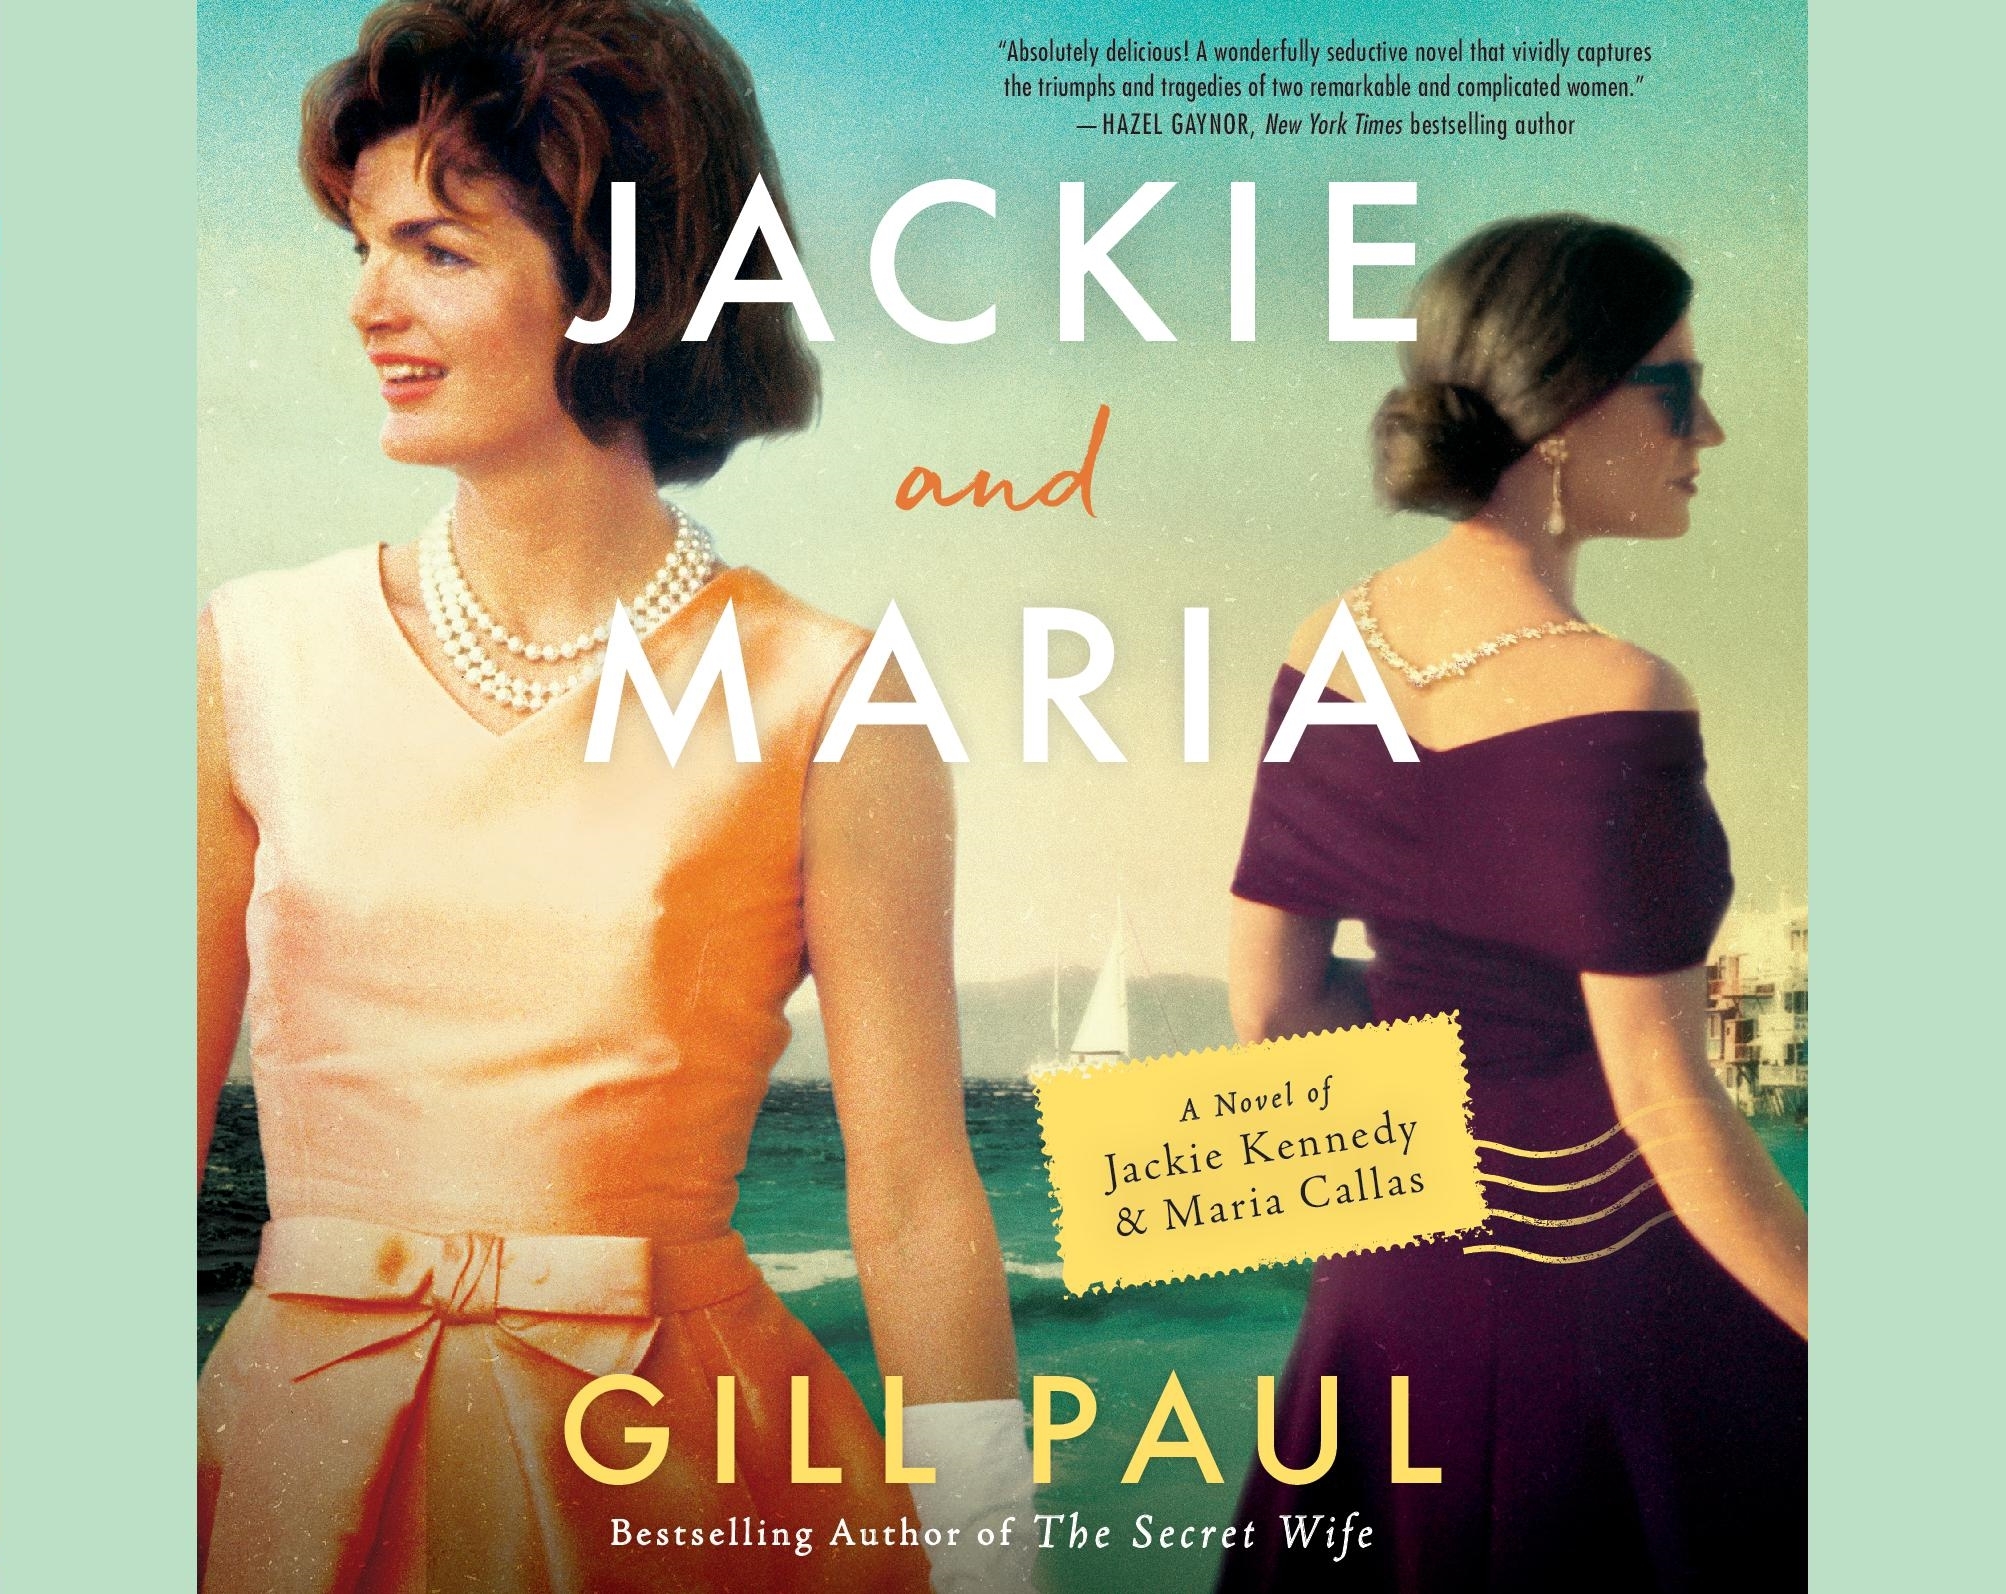 Image for "Jackie and Maria: a novel of Jackie Kennedy & Maria Callas"